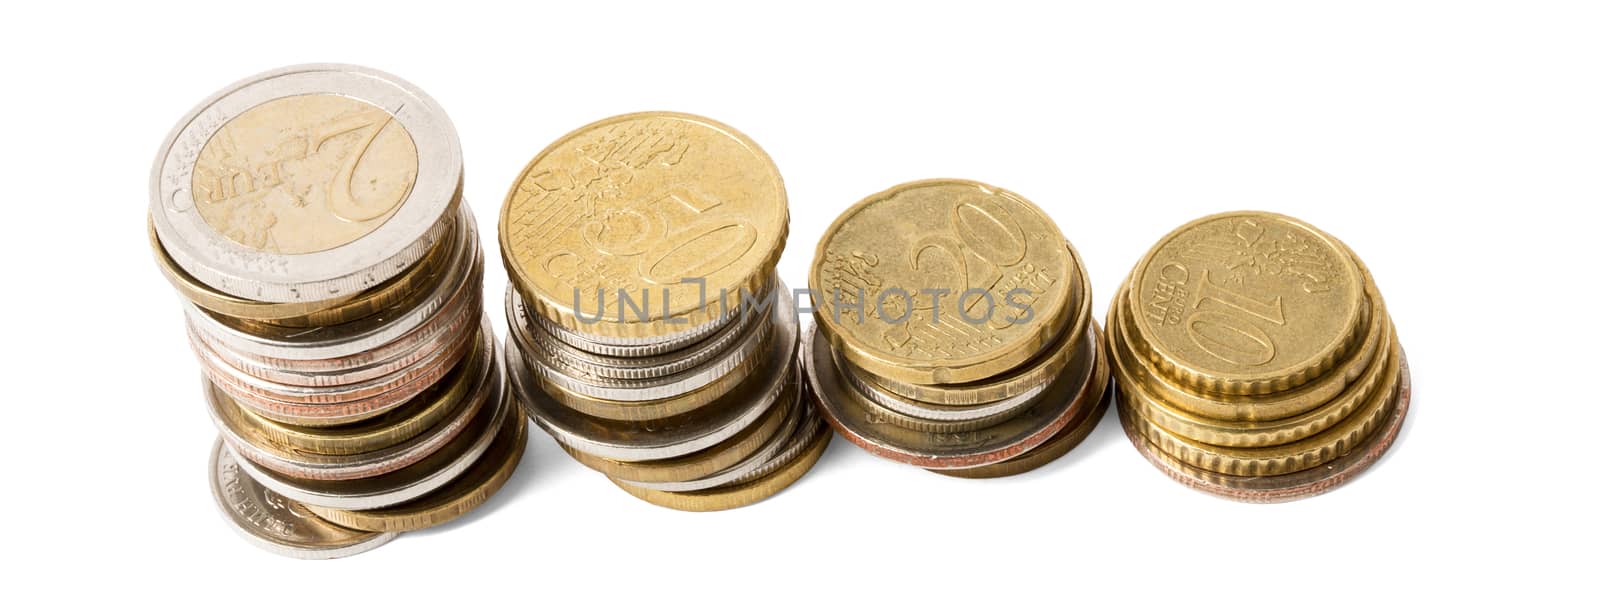 Four stacks of gold coins isolated on white background, top view